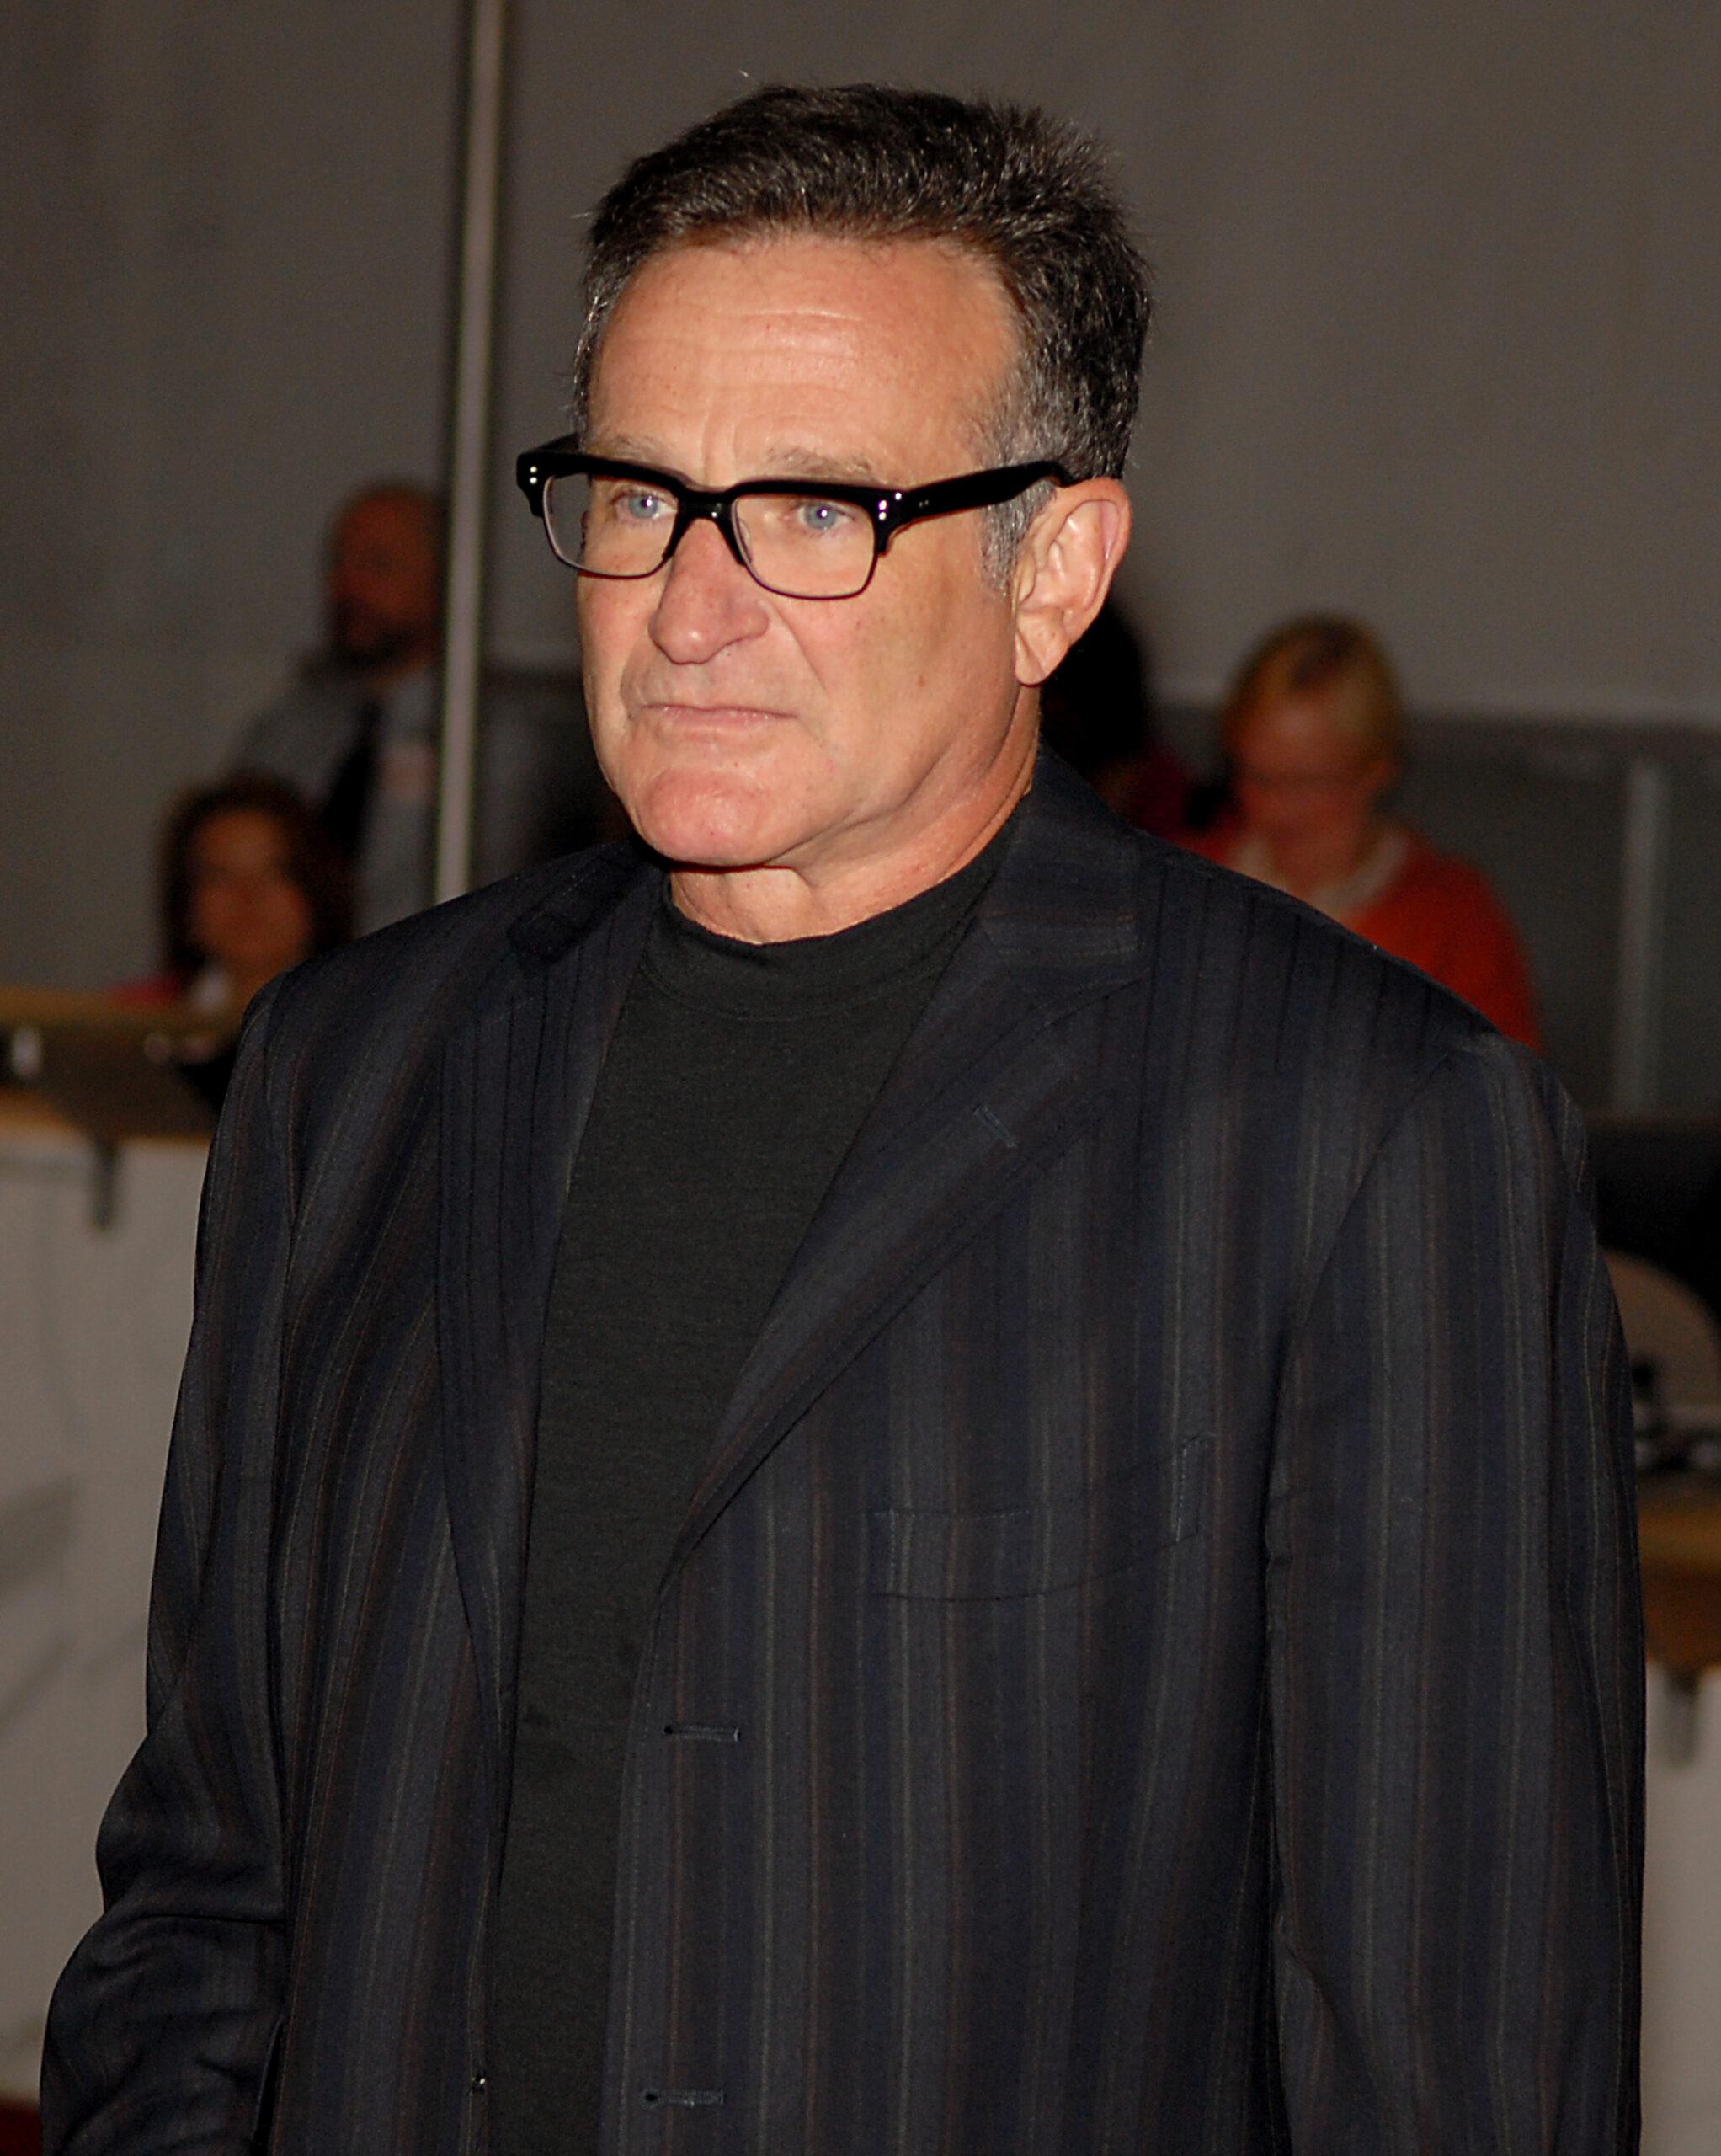 Robin Williams at Billy Crystal Honored with the 2007 Mark Twain Prize